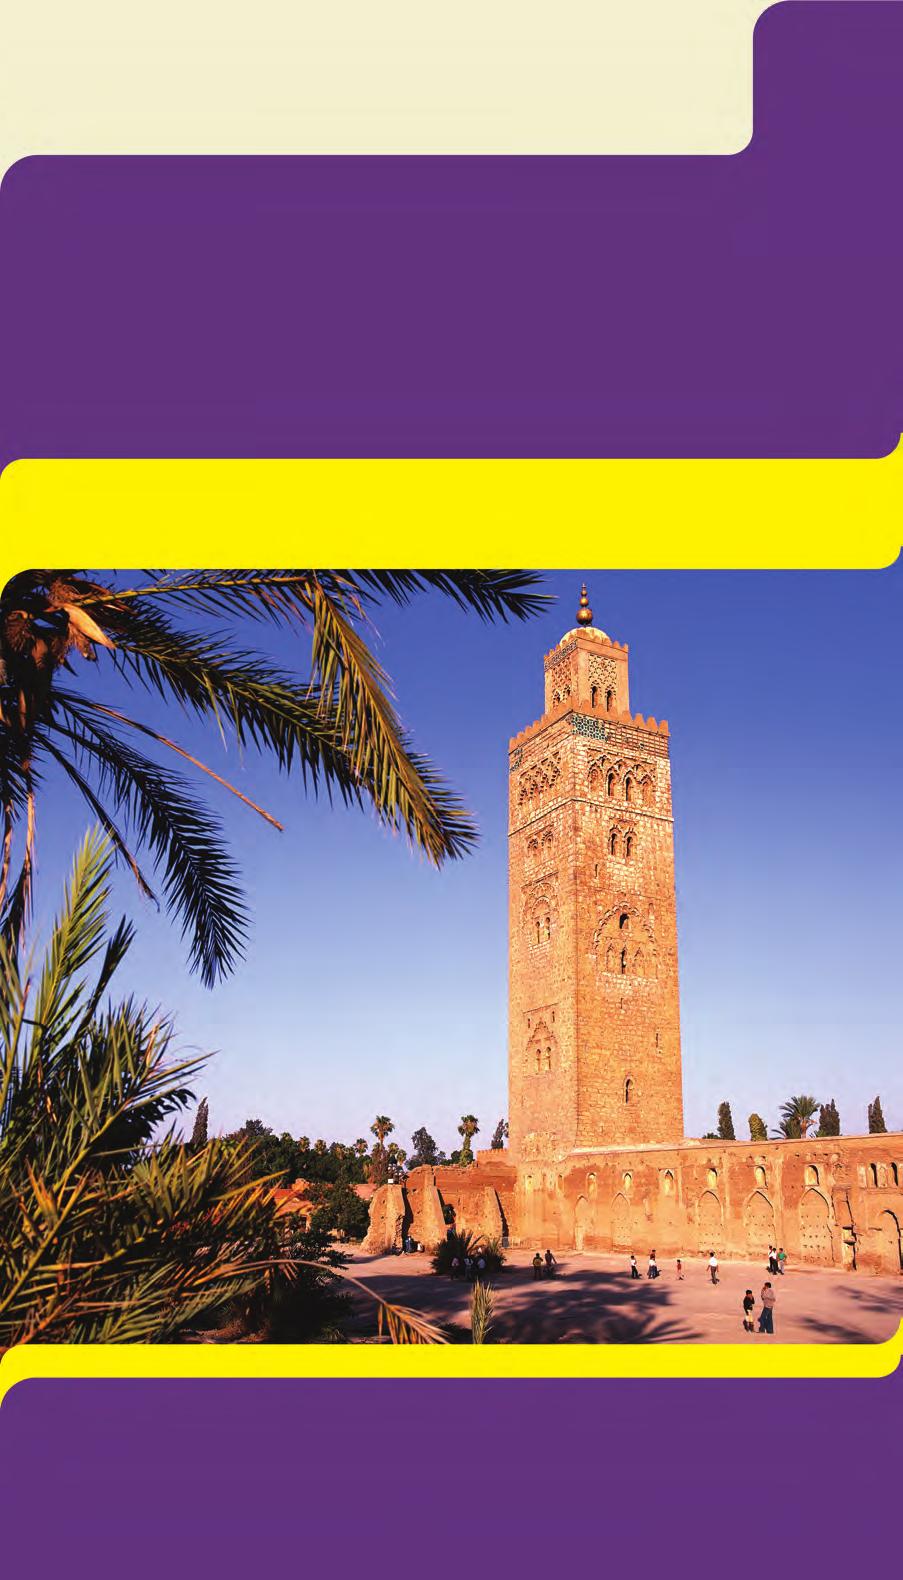 The Newark Museum presents MOROCCAN DISCOVERY From the Imperial Cities to the Sahara October 7-20, 2016 14 days from $5,379 total price from New York, Washington, DC ($4,695 air & land inclusive plus